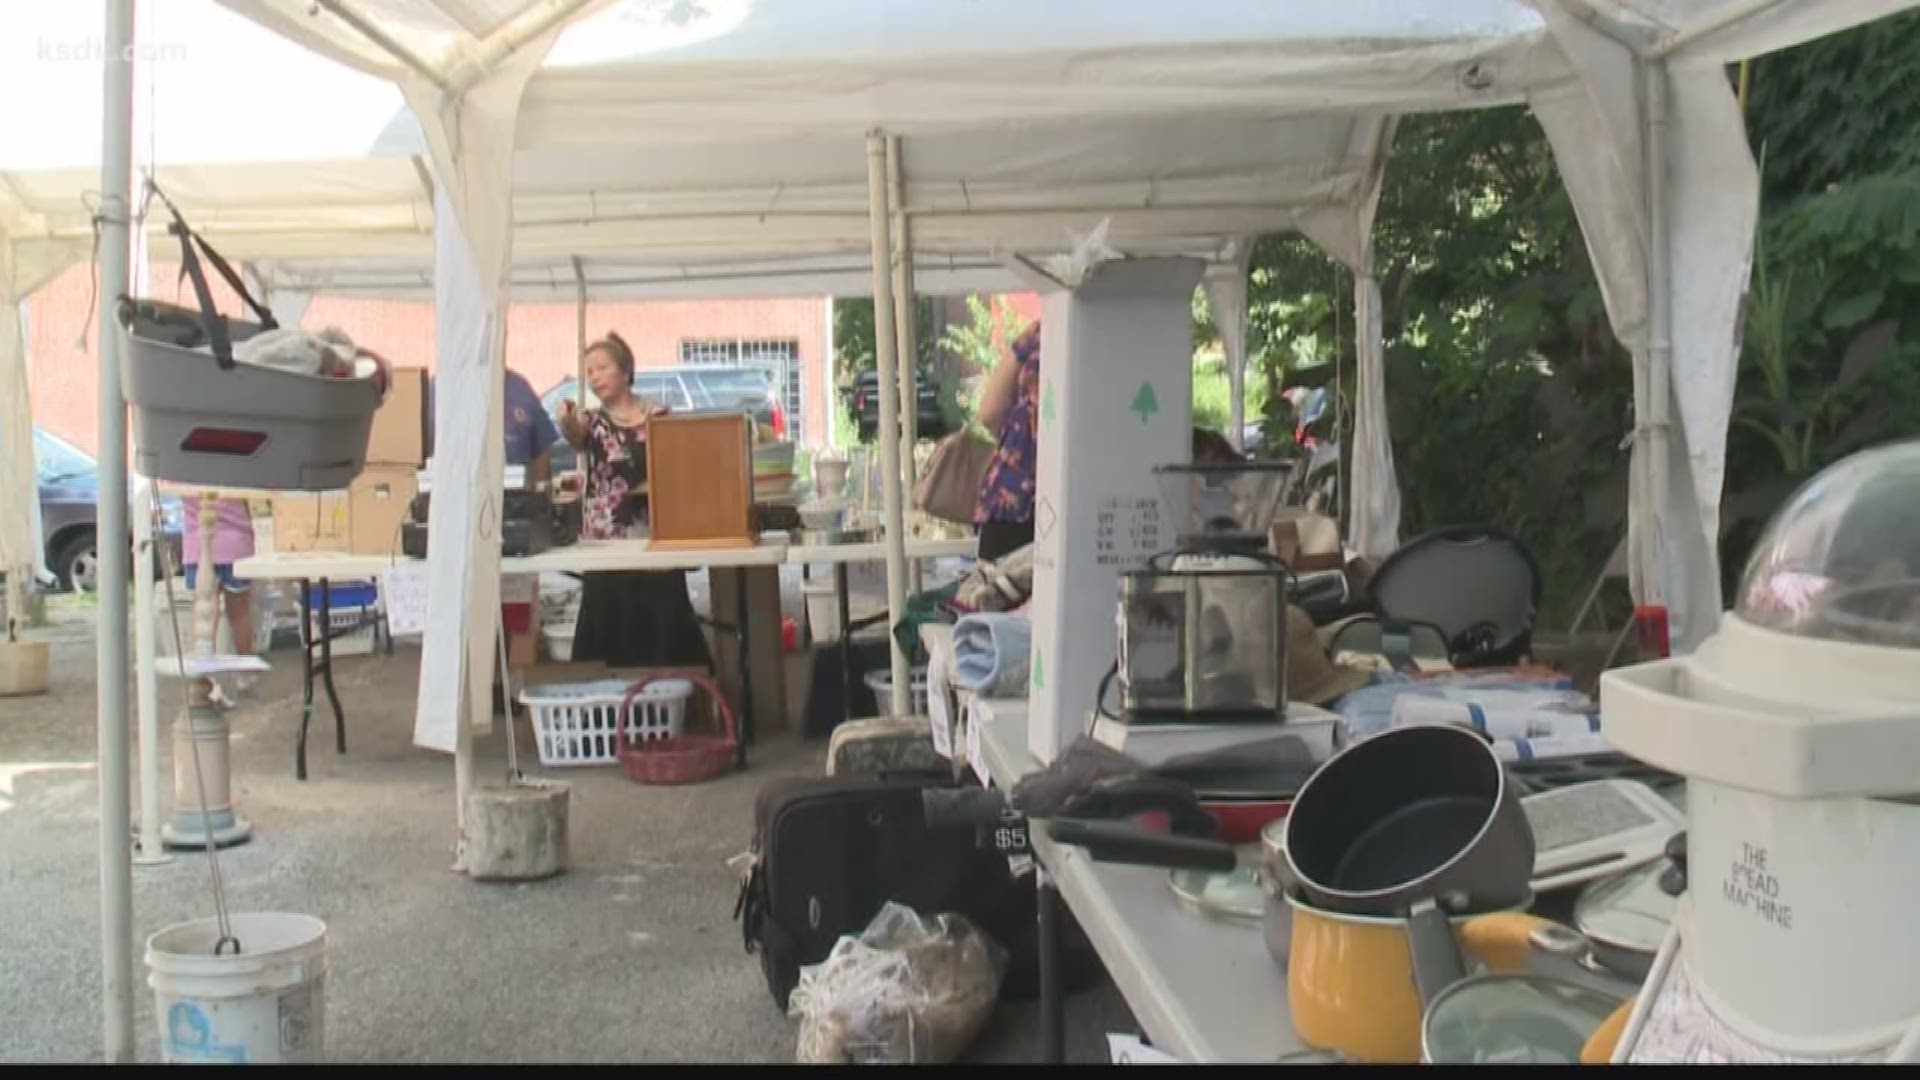 On Labor Day, the Cherokee Buddhist Temple hosted a yard sale and food festival.